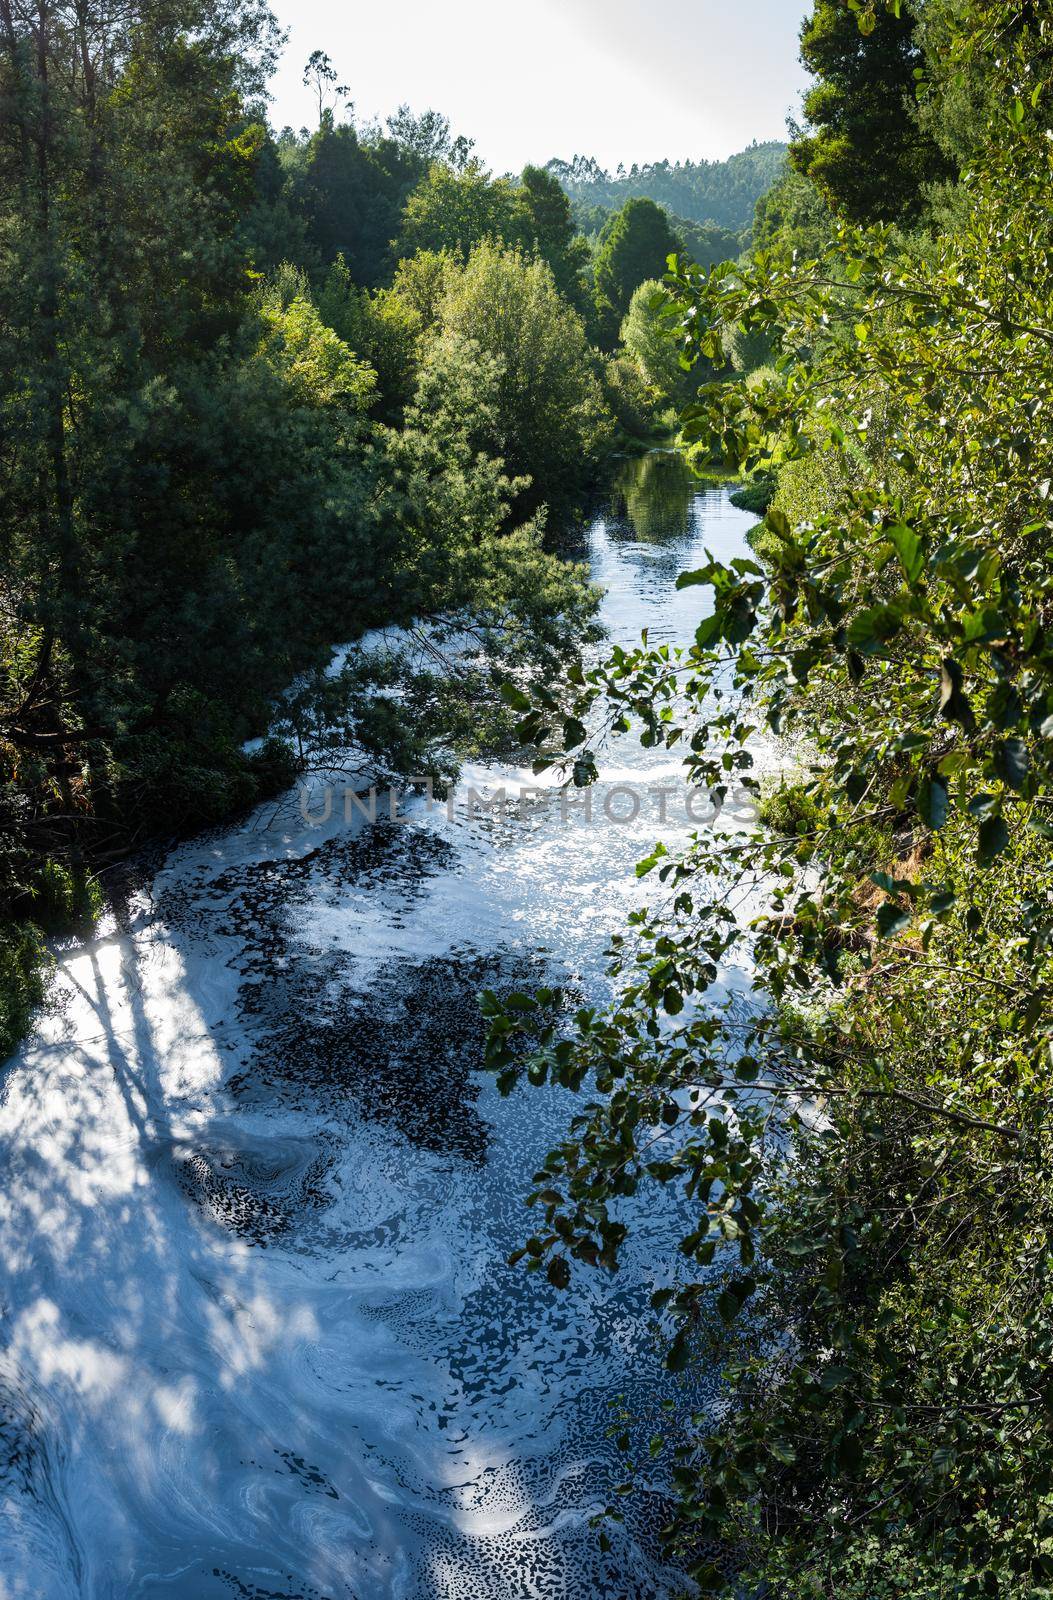 View from the top of the bridge of white foam pollutants swirling across the water surface floating on river Caima, Palmaz - Oliveira de Azemeis - Portugal.